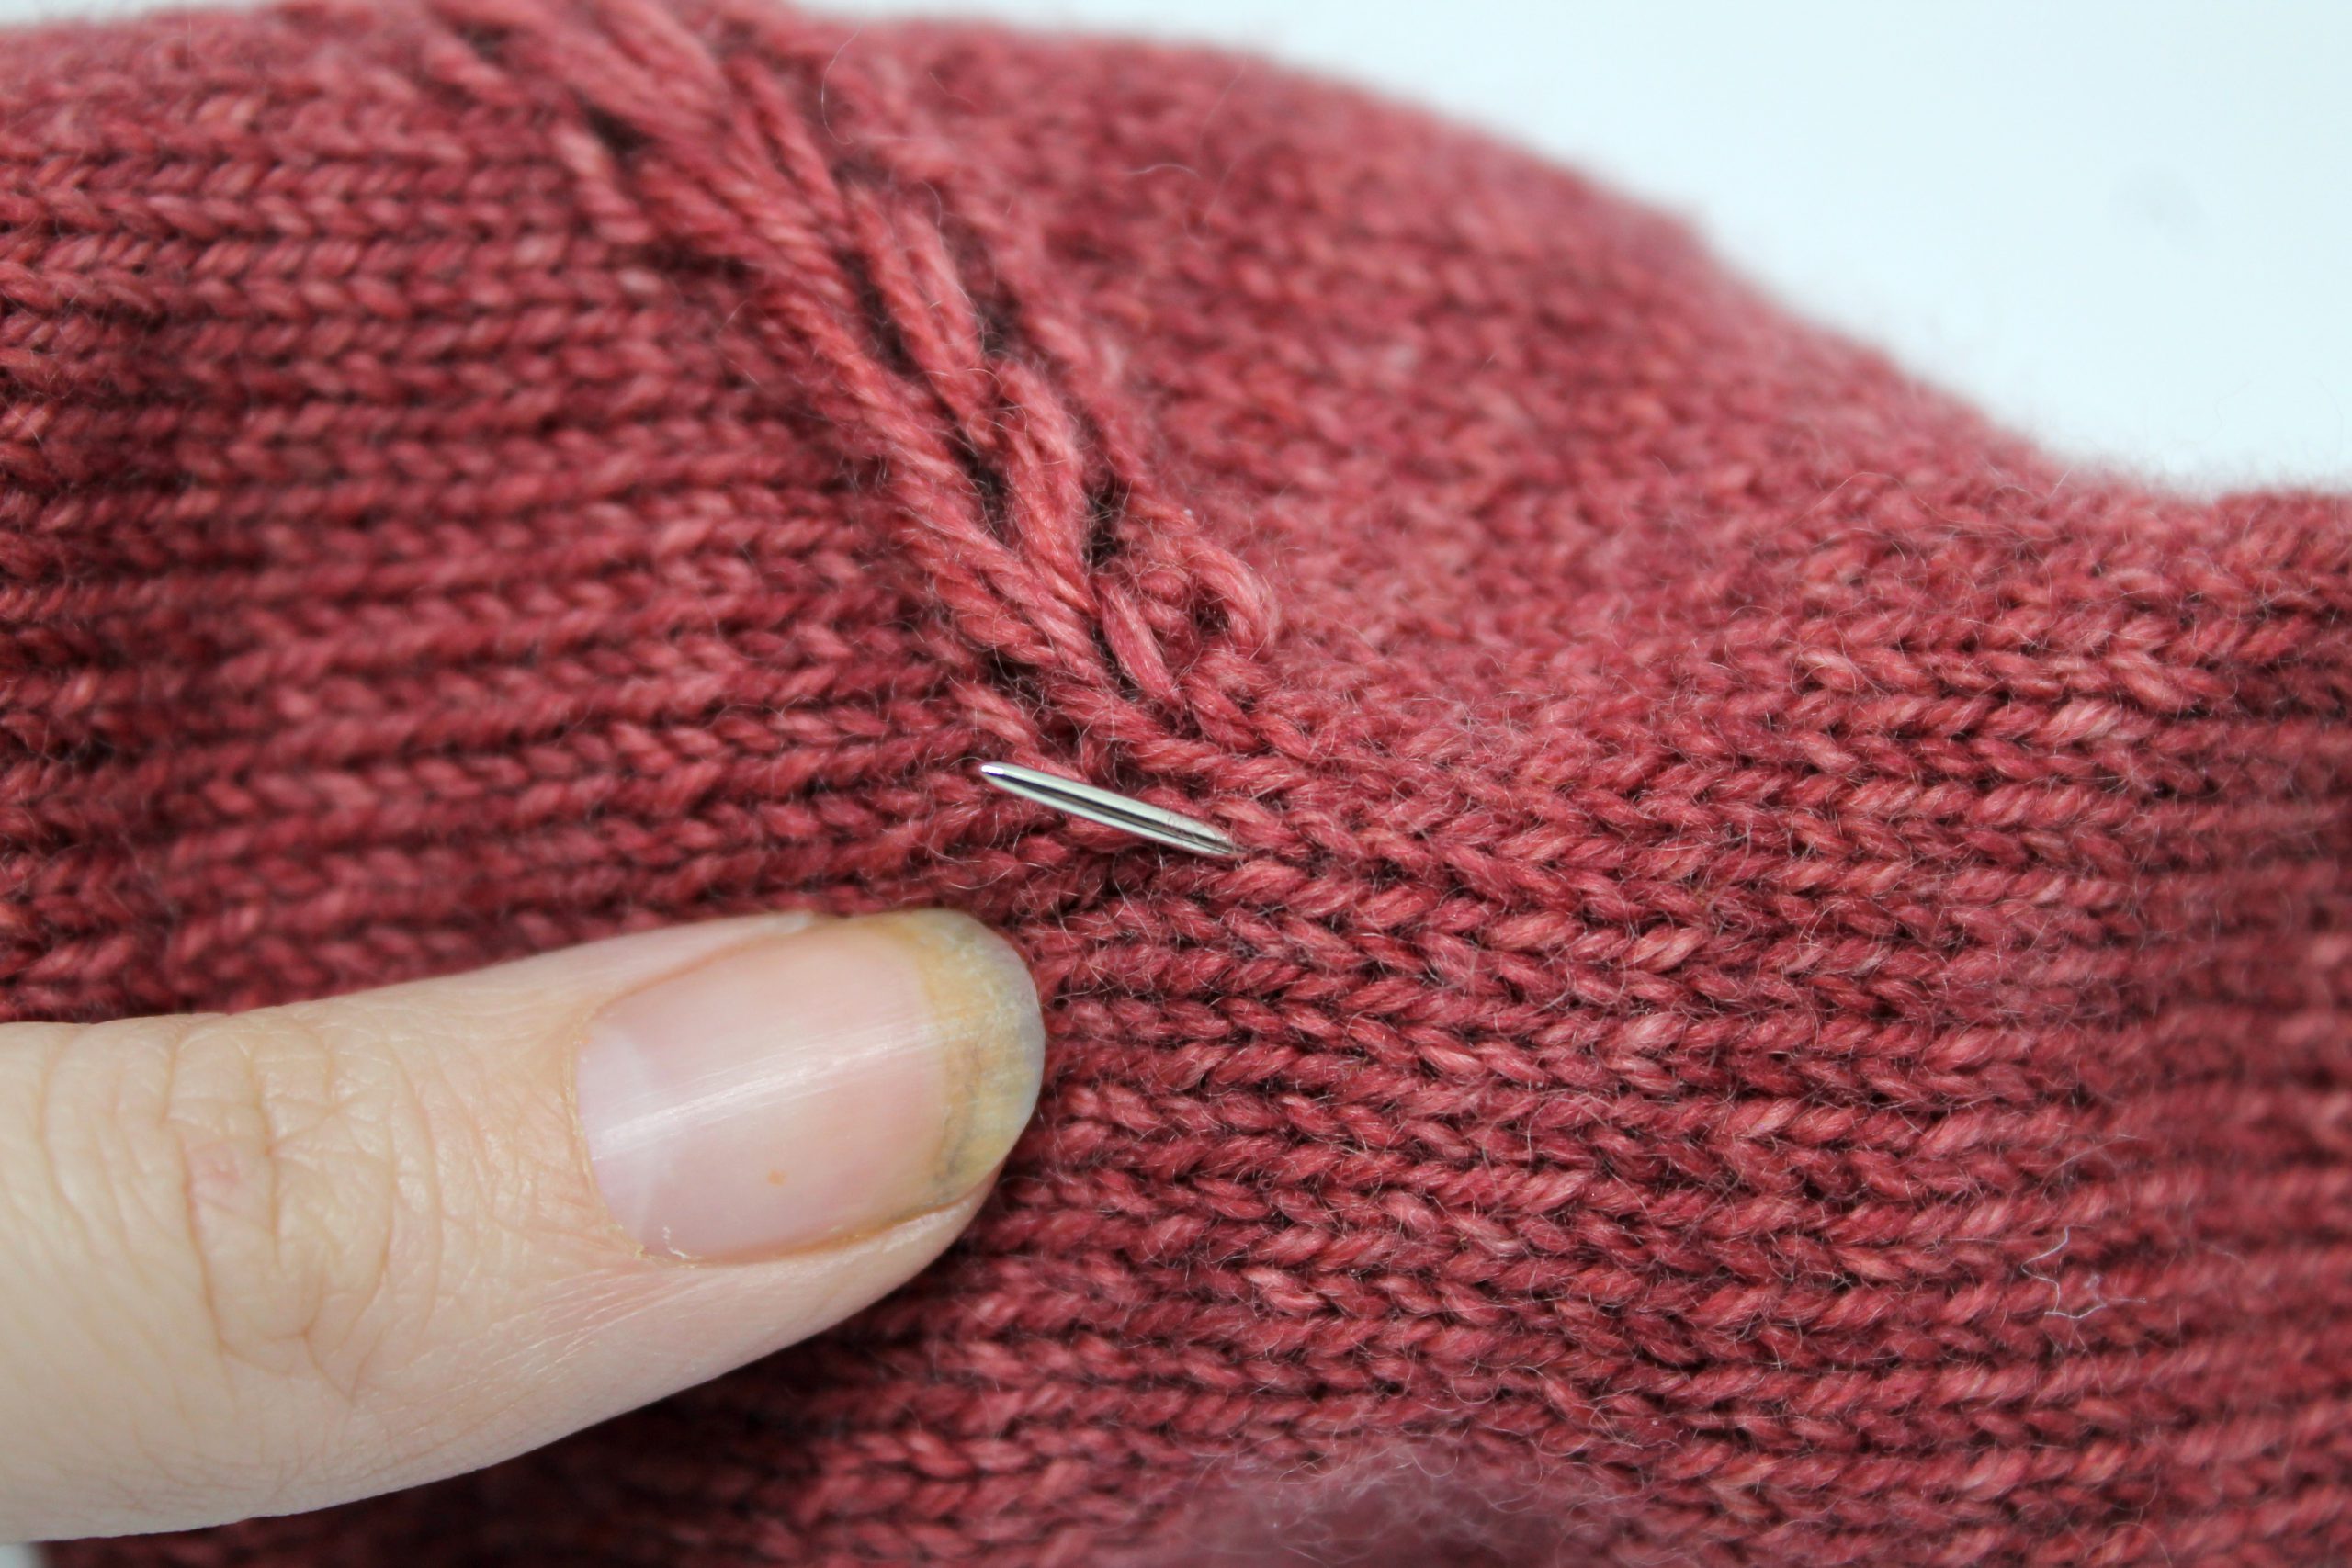 A tapestry needle sticking out of the fabric of a fingerless mitt ready to make the first chain stitch